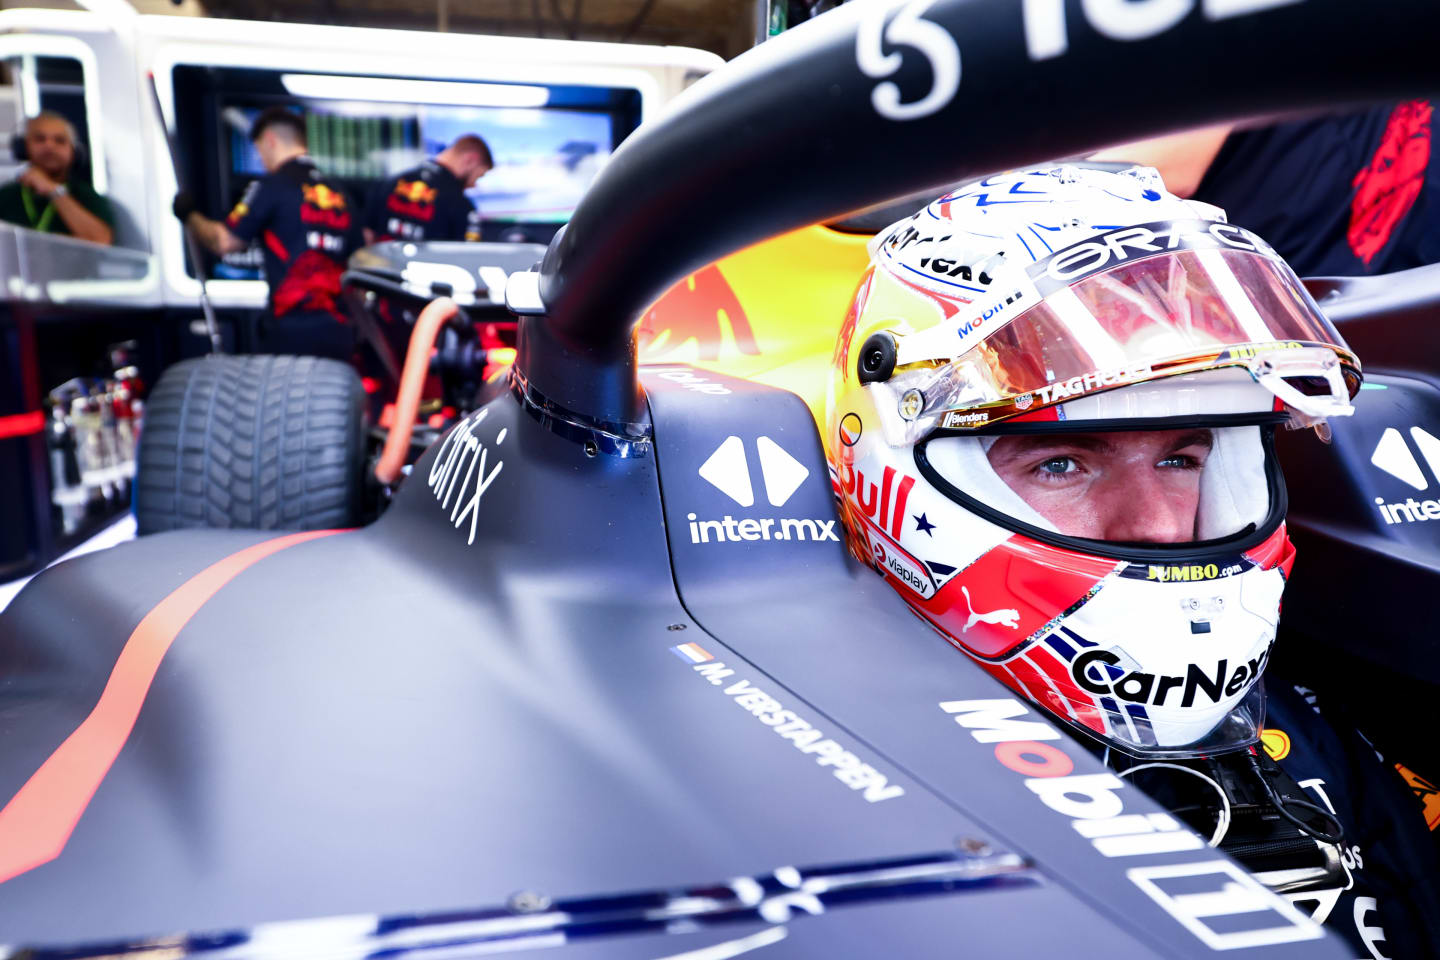 AUSTIN, TEXAS - OCTOBER 21: Max Verstappen of the Netherlands and Oracle Red Bull Racing prepares to drive in the garage during practice ahead of the F1 Grand Prix of USA at Circuit of The Americas on October 21, 2022 in Austin, Texas. (Photo by Mark Thompson/Getty Images)